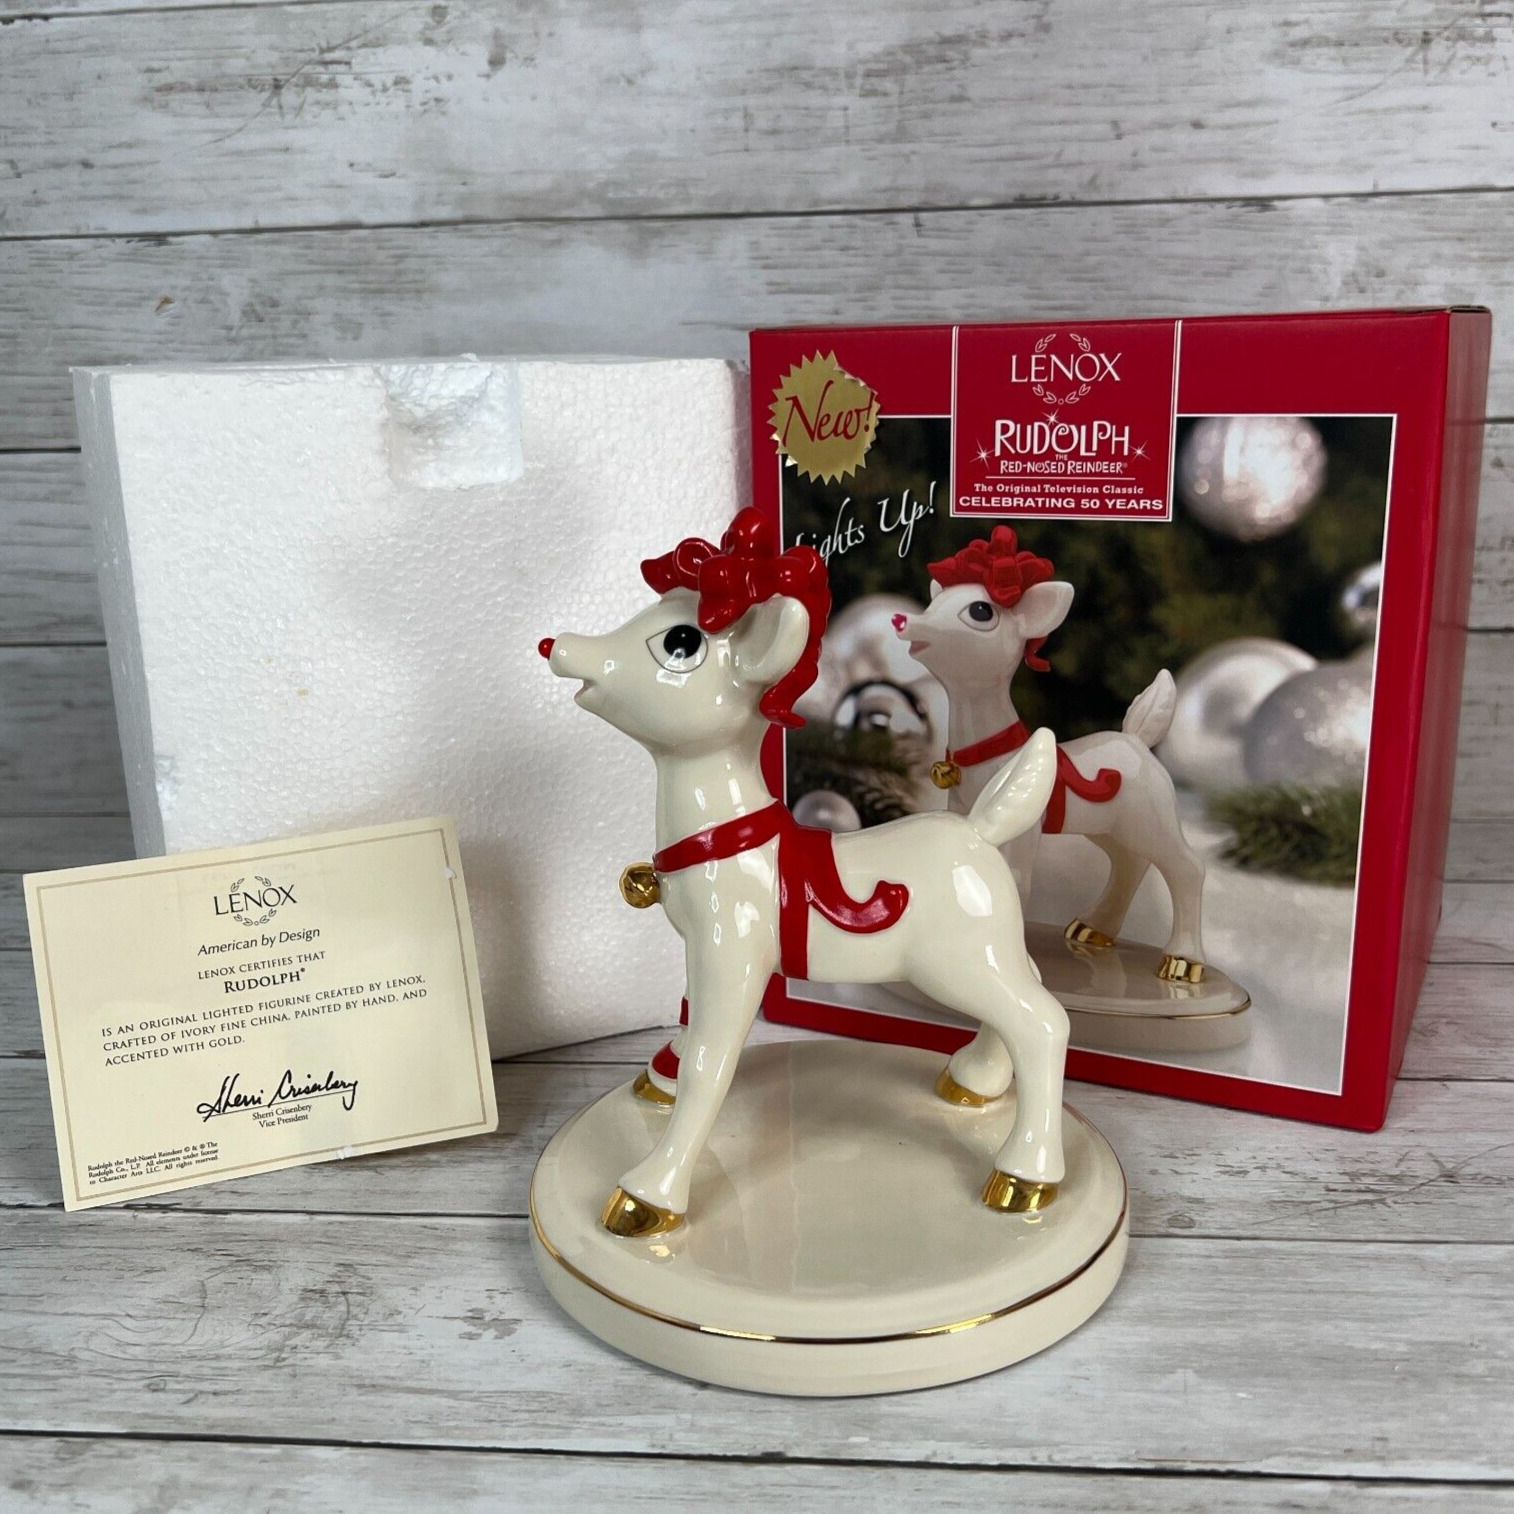 LENOX Christmas RUDOLPH Red-Nosed Reindeer Lighted Porcelain Figurine Holiday